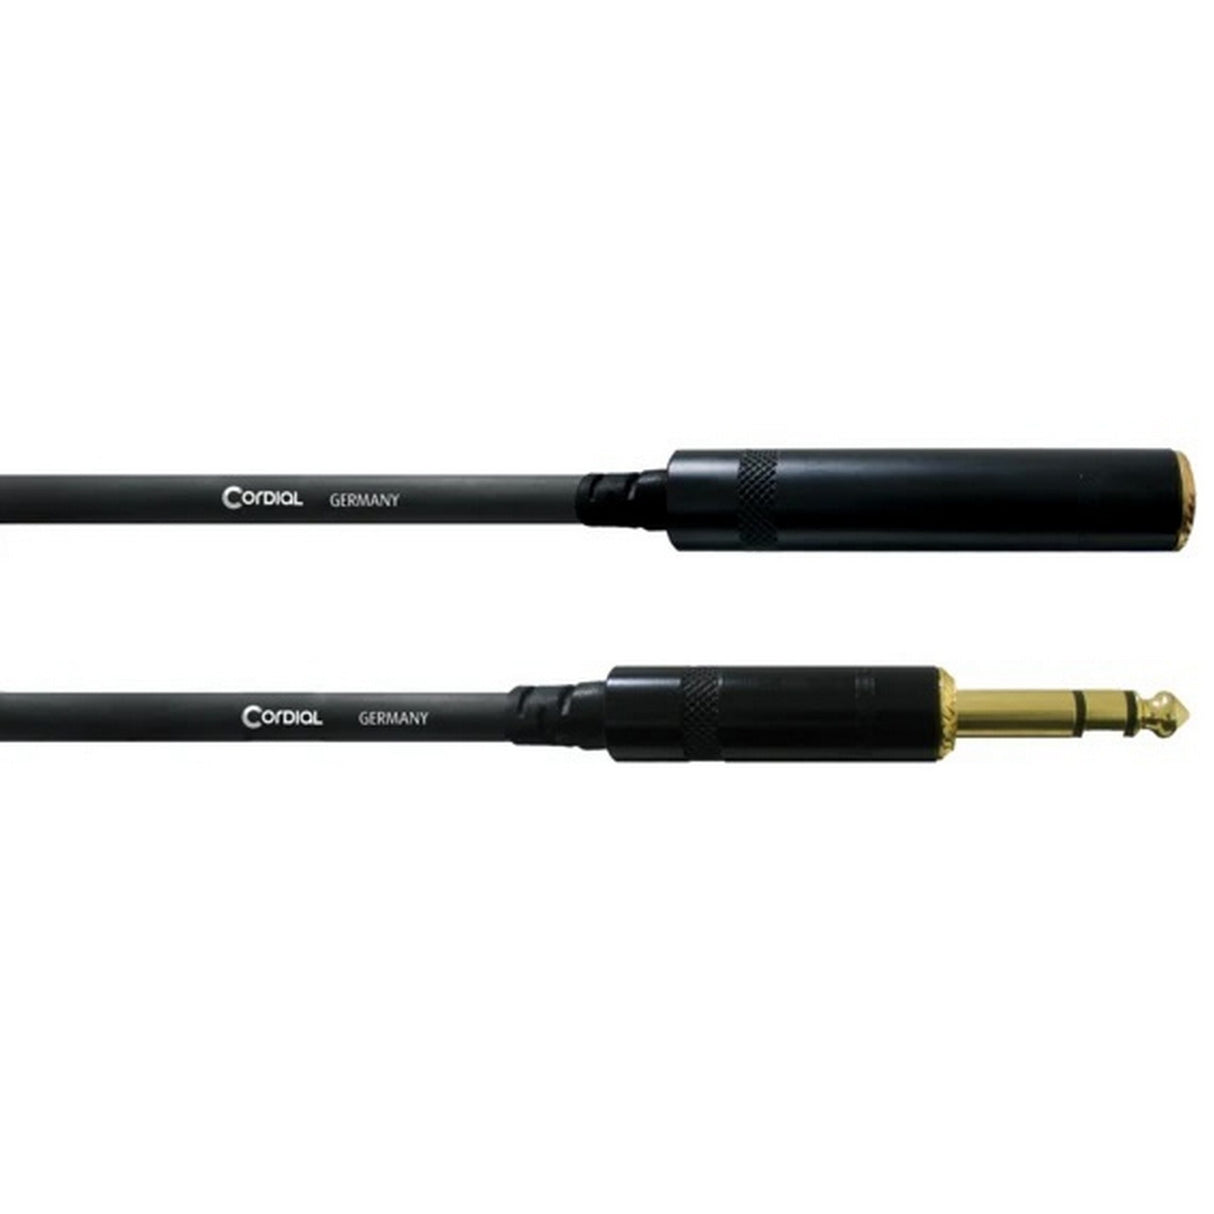 Cordial CFM 7.5 VK Stereo 1/4-Inch TRS to 1/4-Inch Stereo Female Cable, Black, 25-Feet